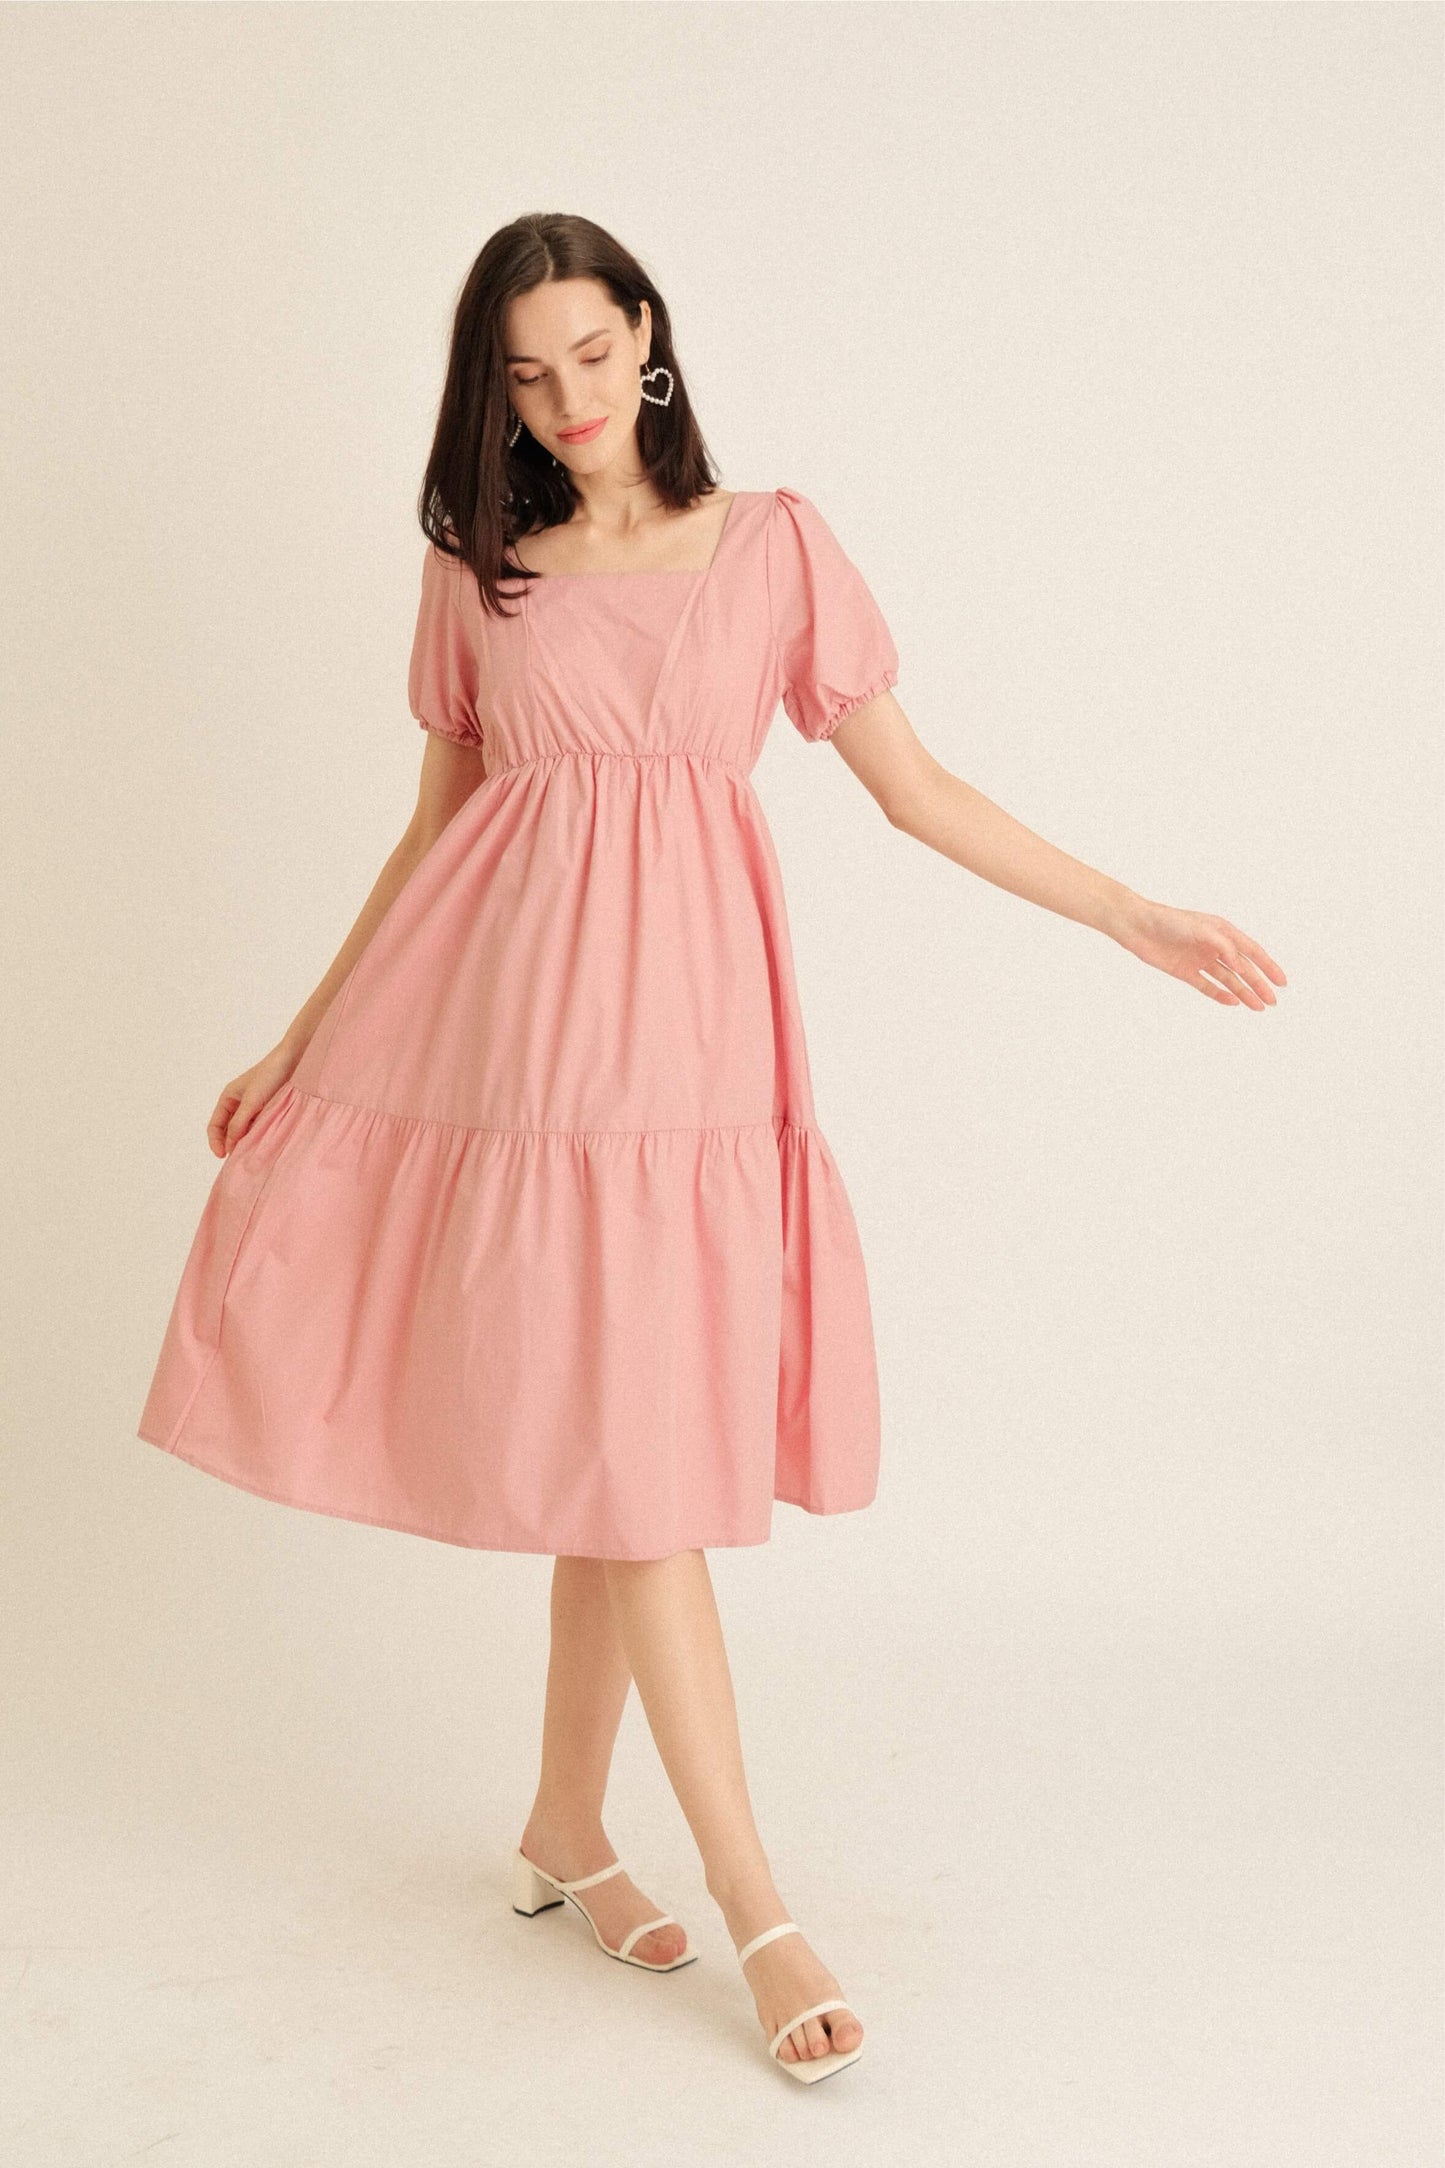 LUCILLE DRESS IN SOFT BERRY